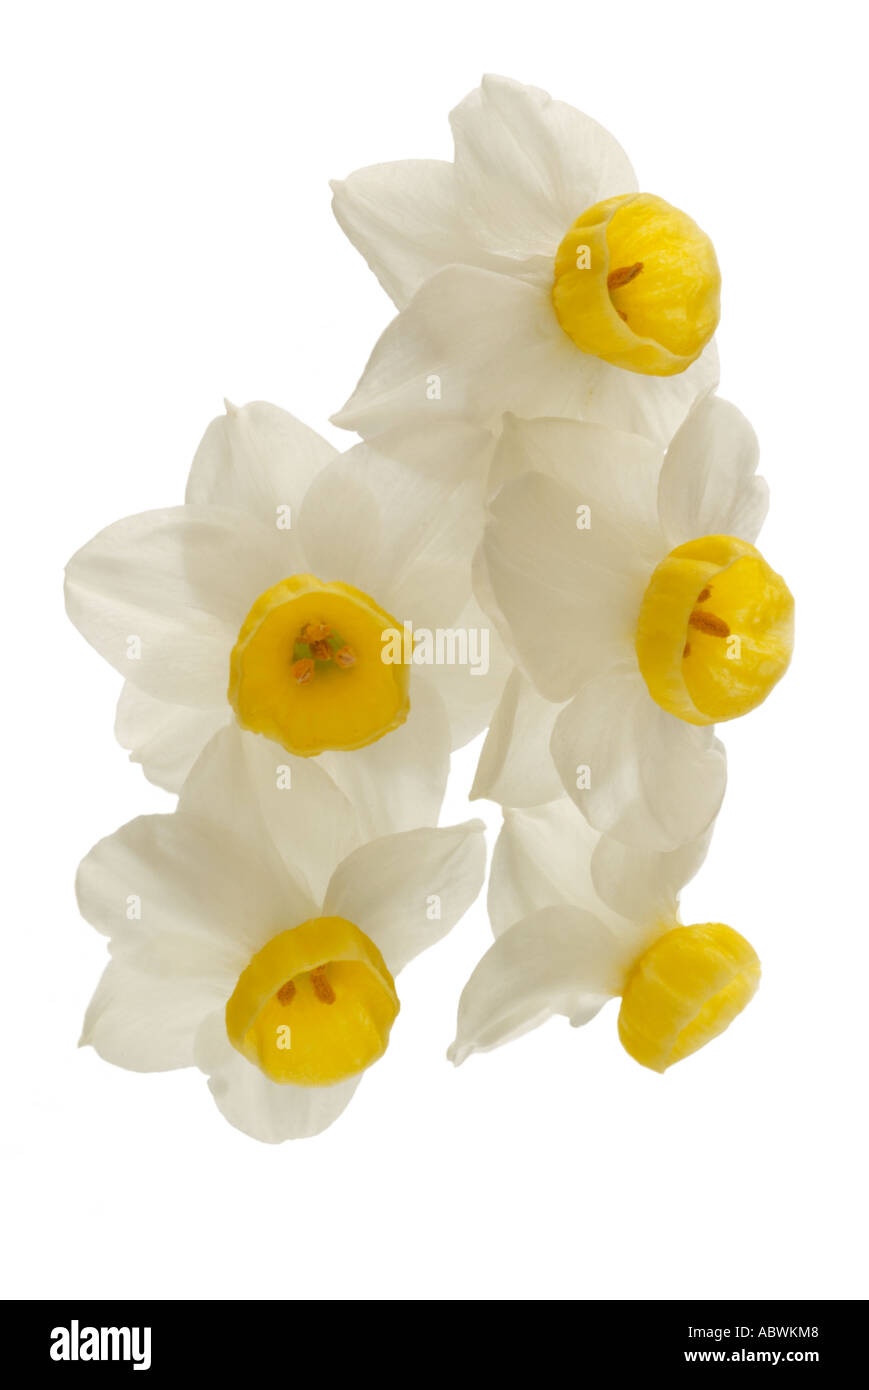 White narcissi daffodil white cream group petal flower close up landscape scenic iconic travel atmospheric moody classic Stock Photo